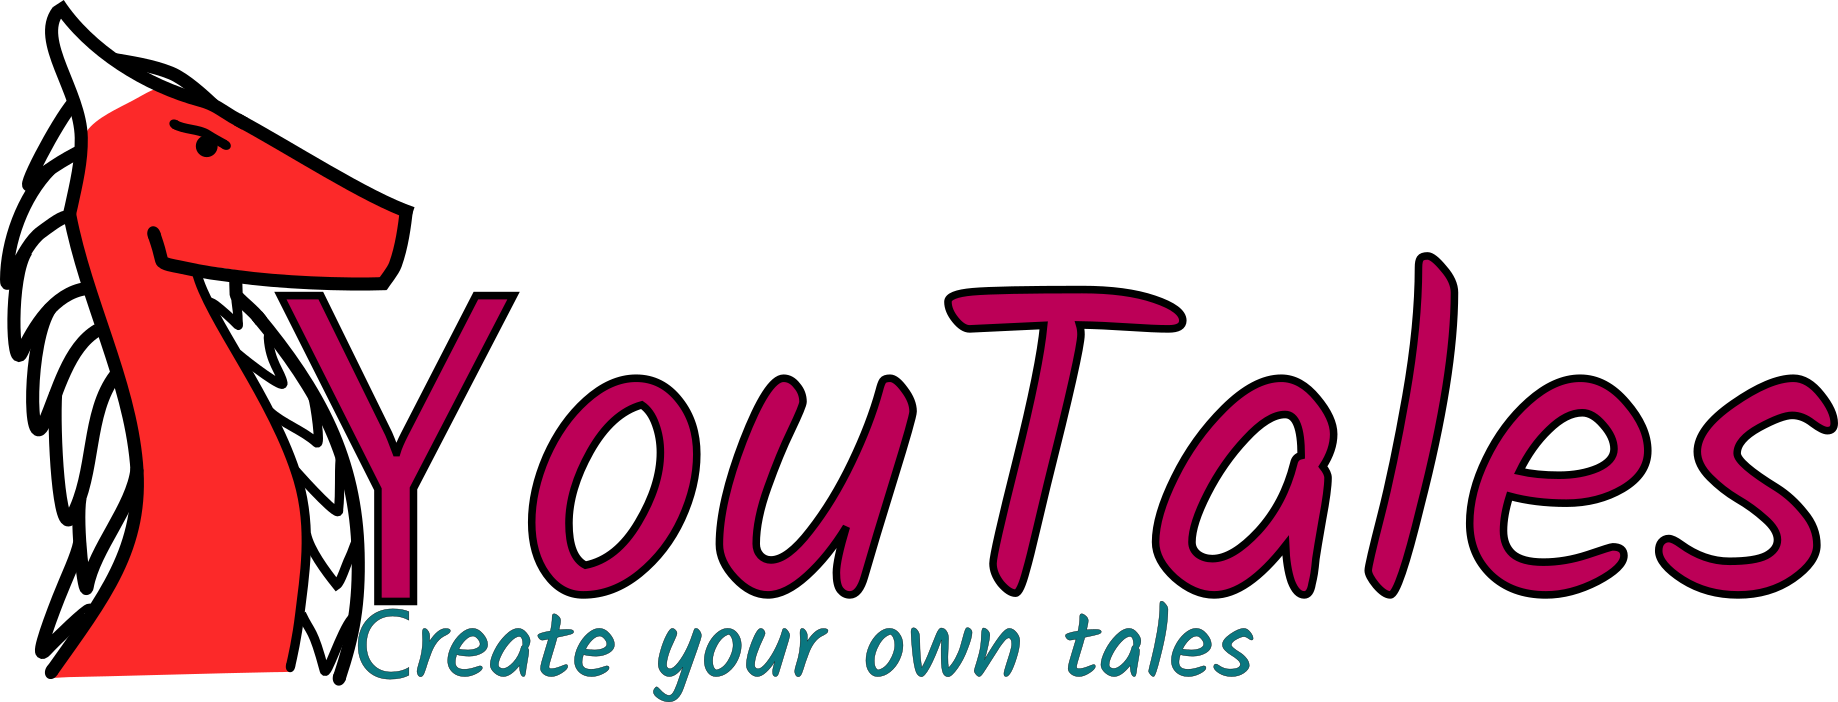 YouTales - Create your own tales